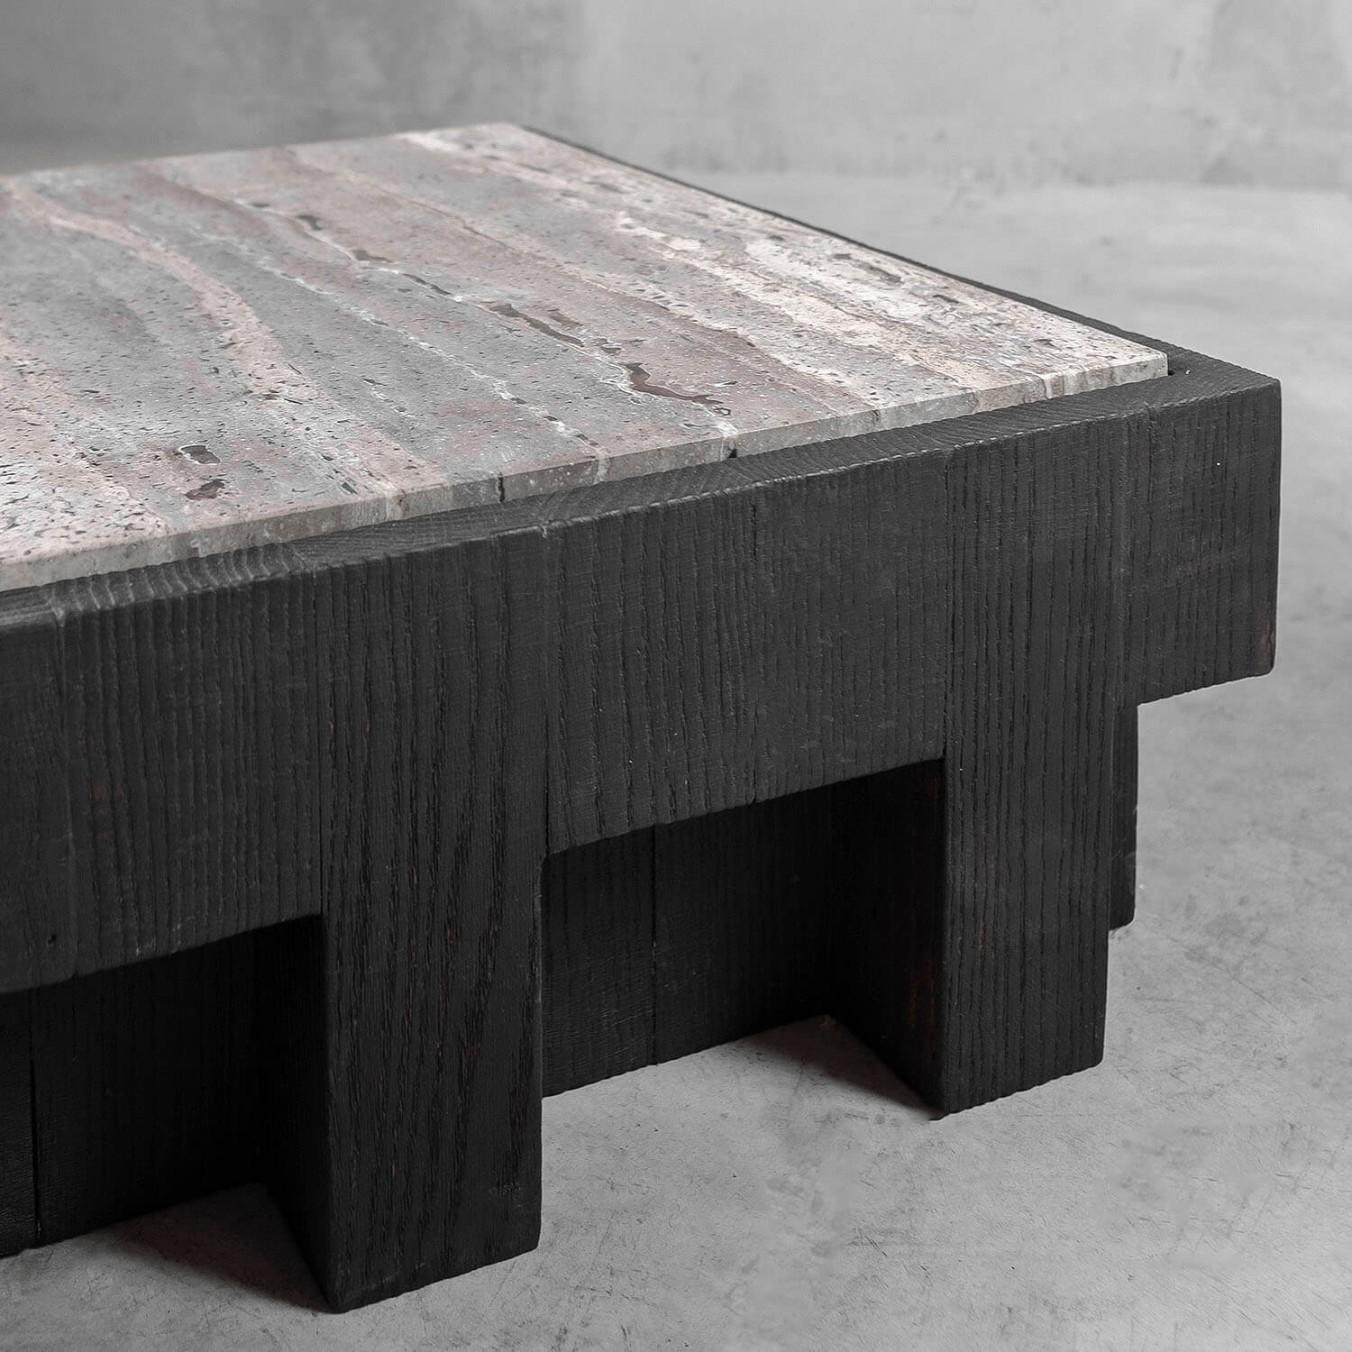 Cross coffee table by Arno Declercq
Material: Belgium oak & stone by Van Den Weghe. Different stones available.
Dimensions: 65 cm W x 26 cm H x 65 cm D, 25.6” W x 10.2” H x 25.6” D

Signed by Arno Declercq.

Arno Declercq
Belgian designer and